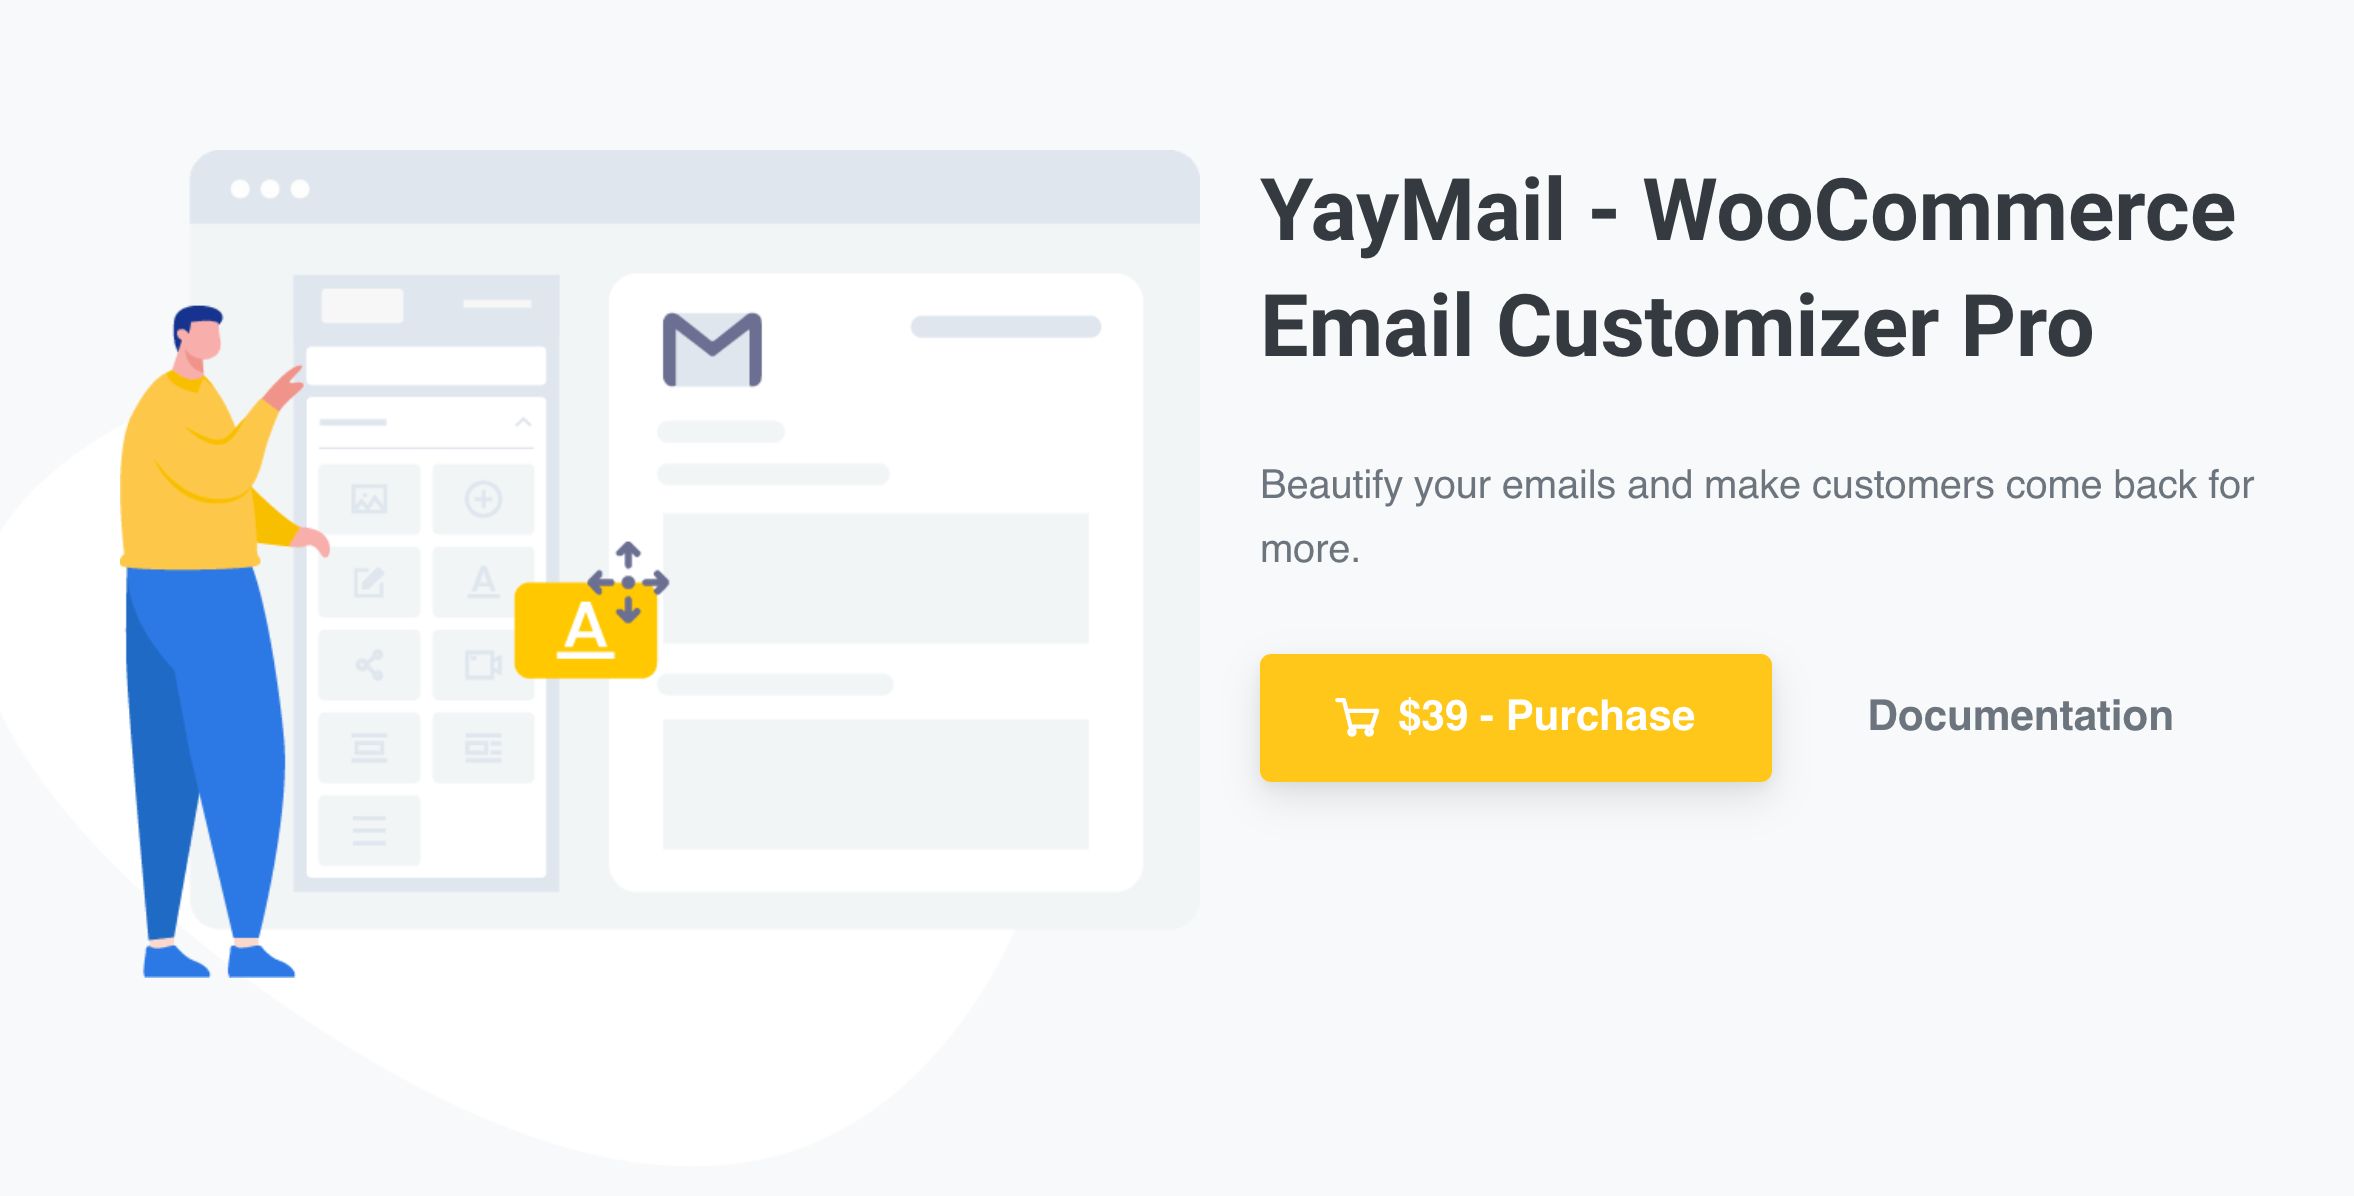 Find pricing, reviews and other details about YayMail